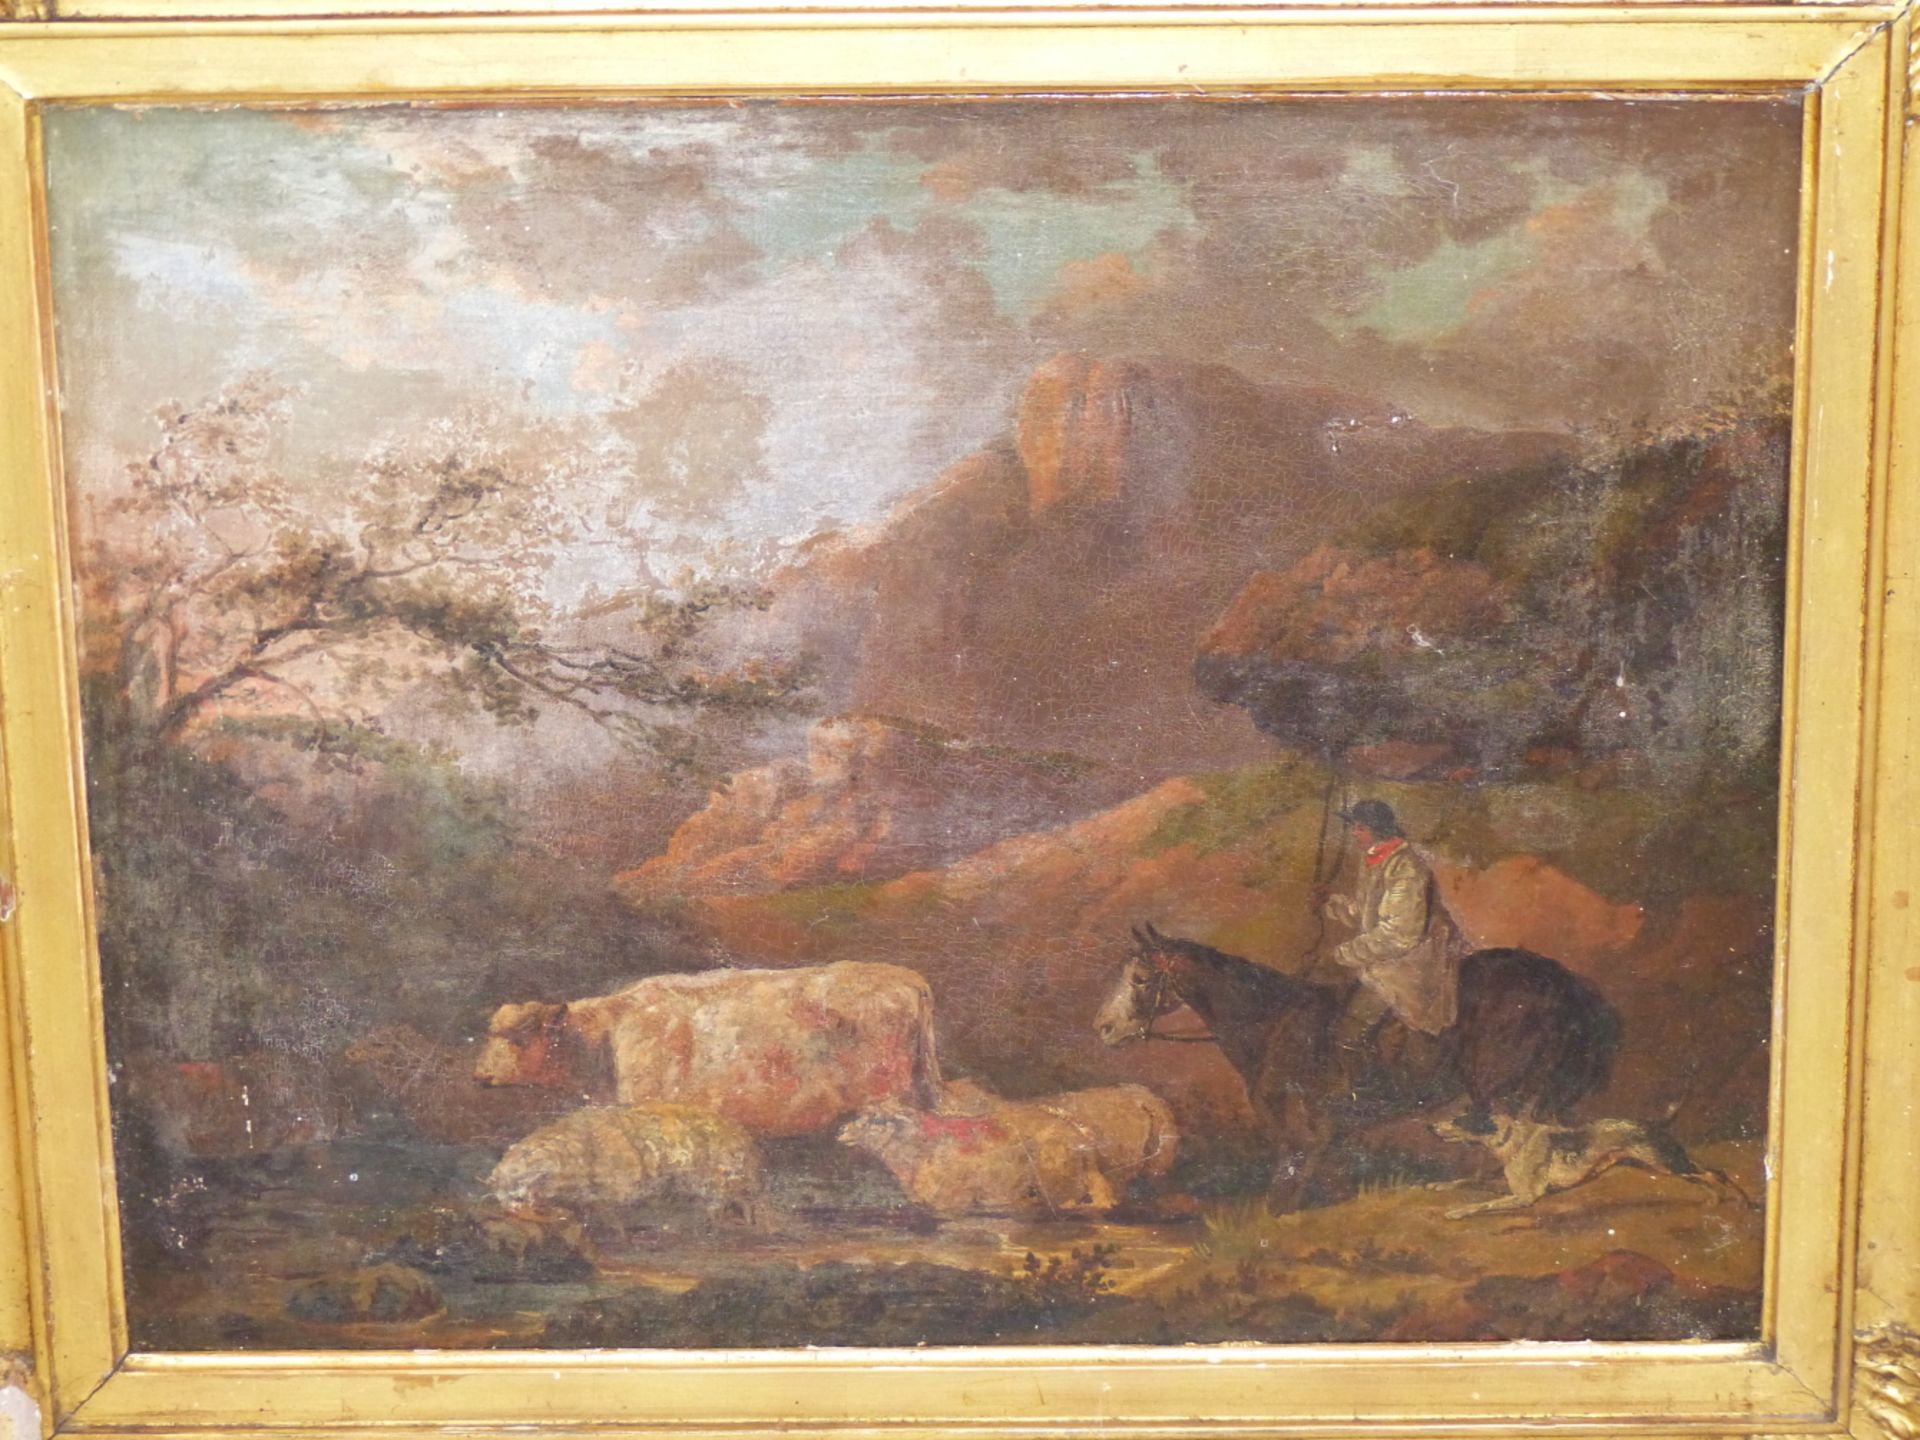 19th C. ENGLISH SCHOOL IN THE MANNER OF GEORGE MORLAND. HERDING THE CATTLE, OIL ON CANVAS. 41 x - Image 2 of 11